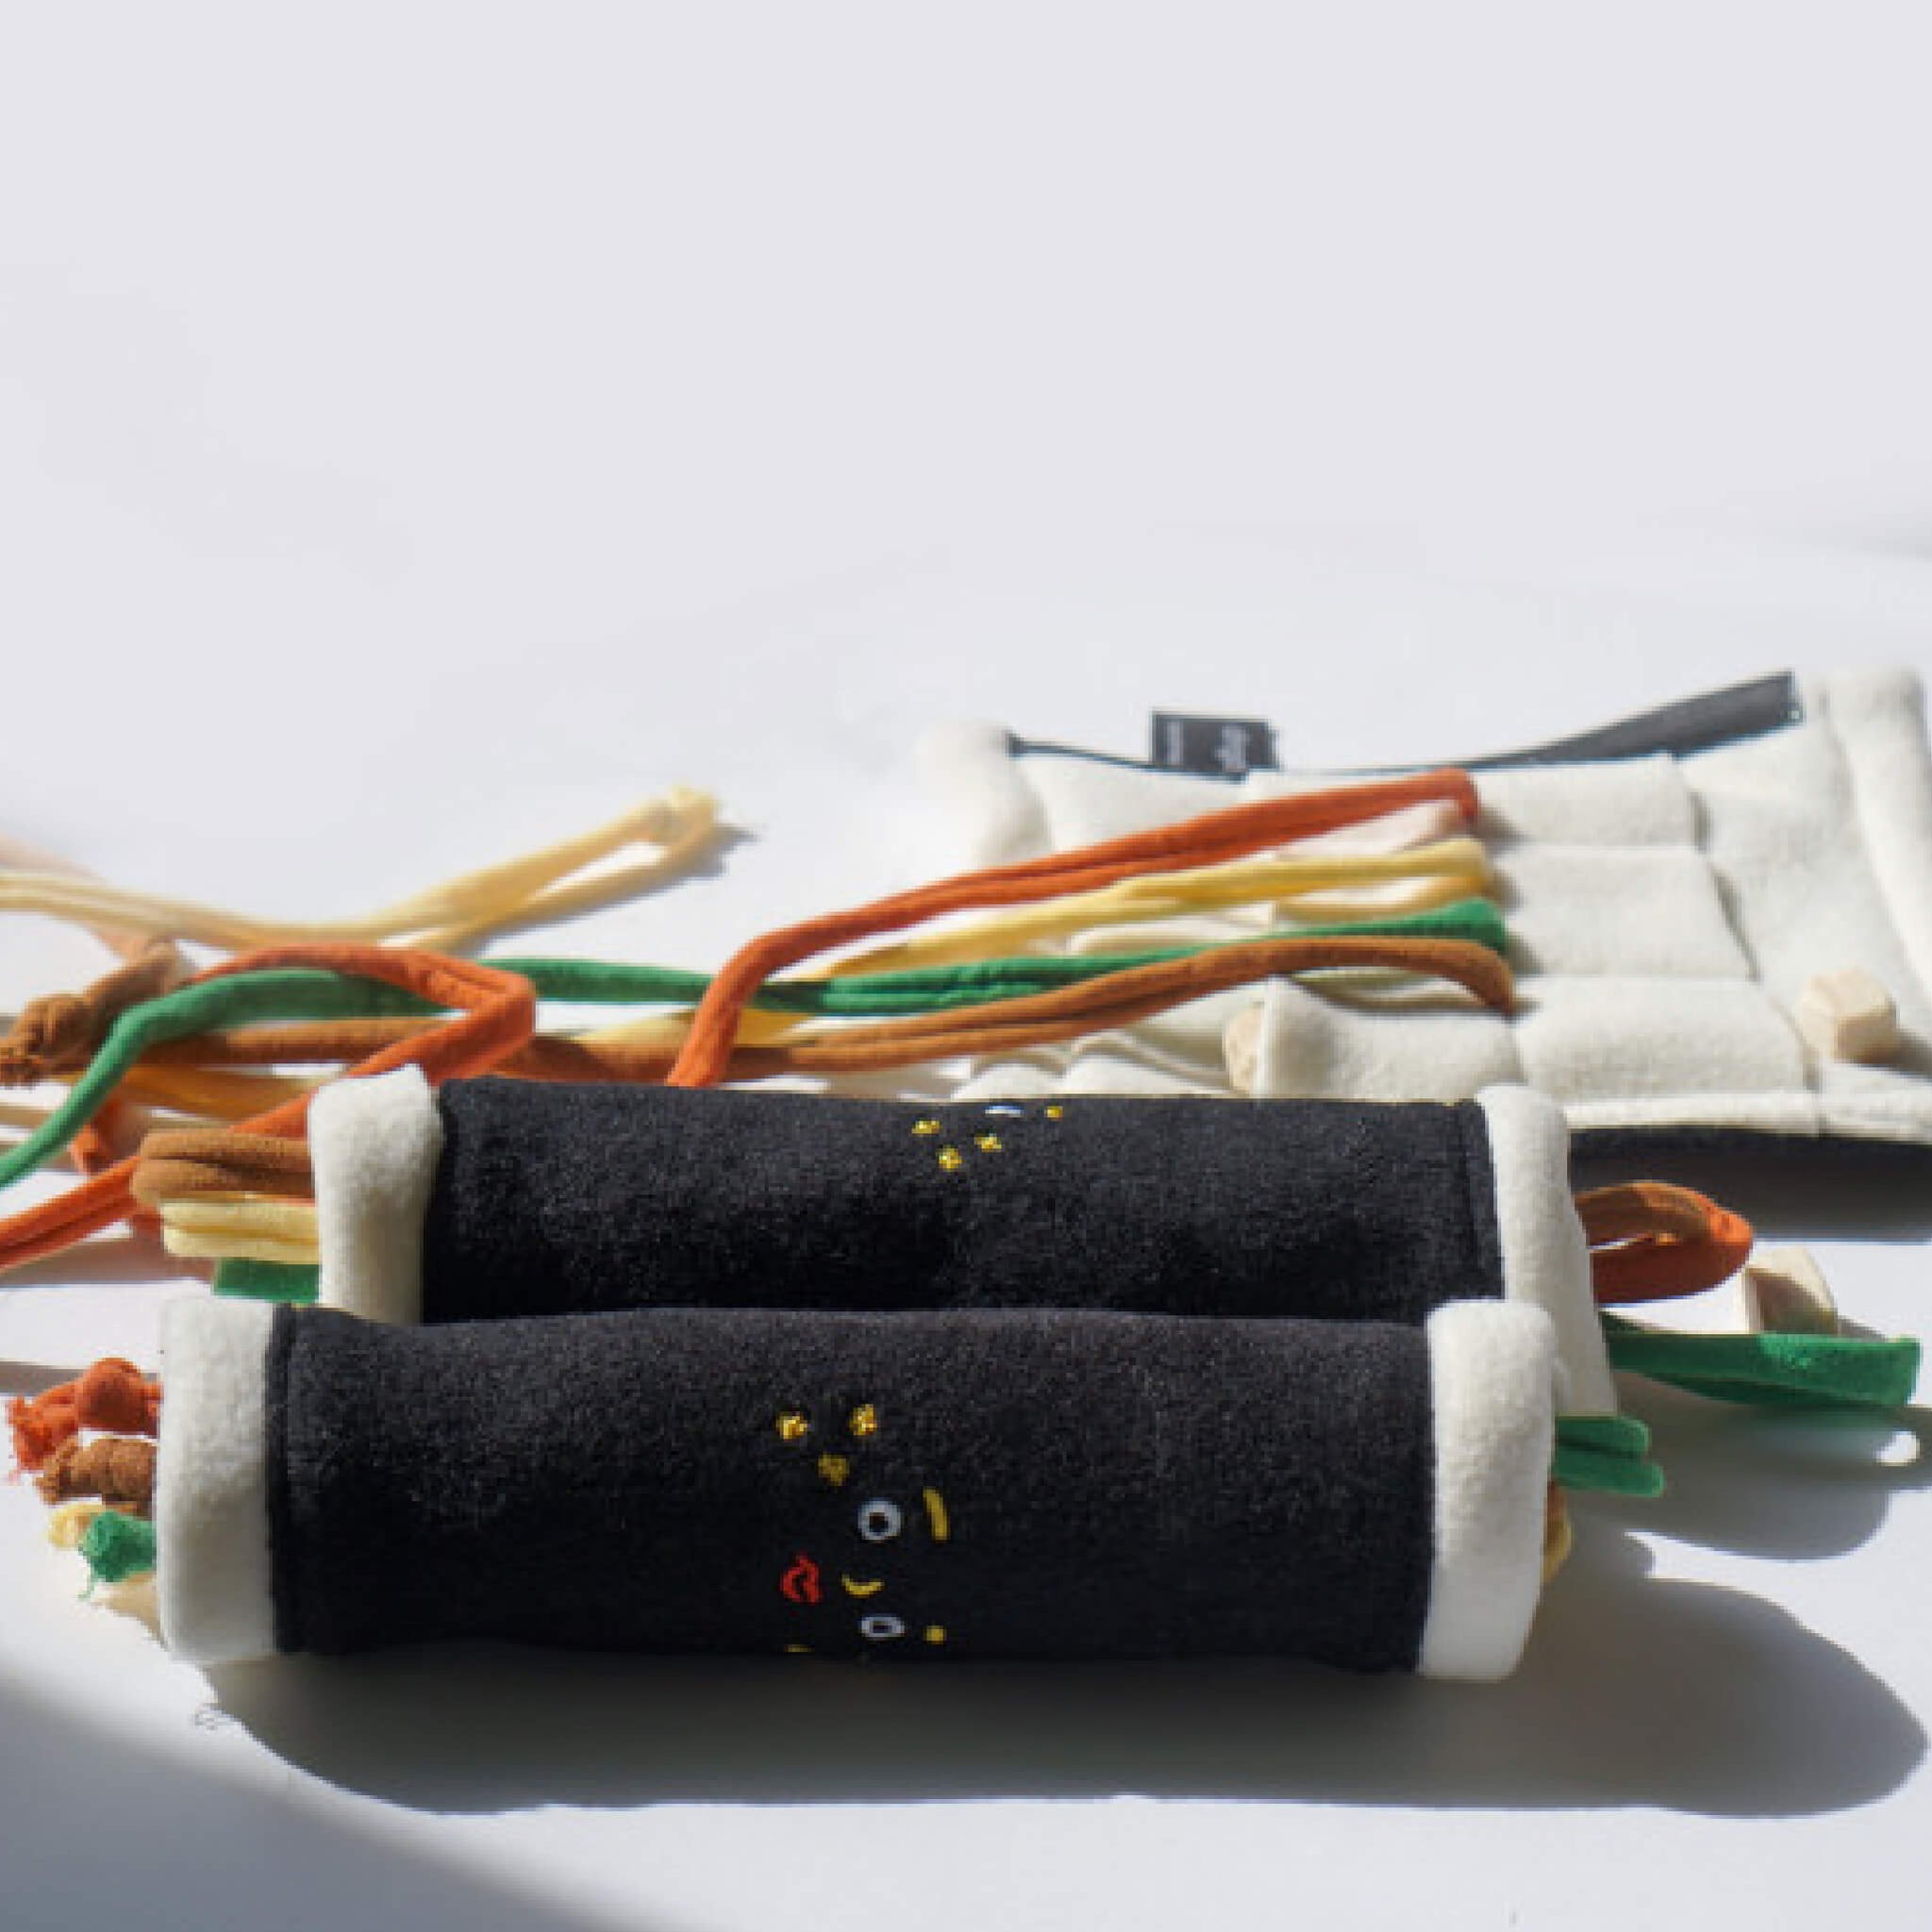 Strings and places for snack inside the regular gimbap nosework toy.